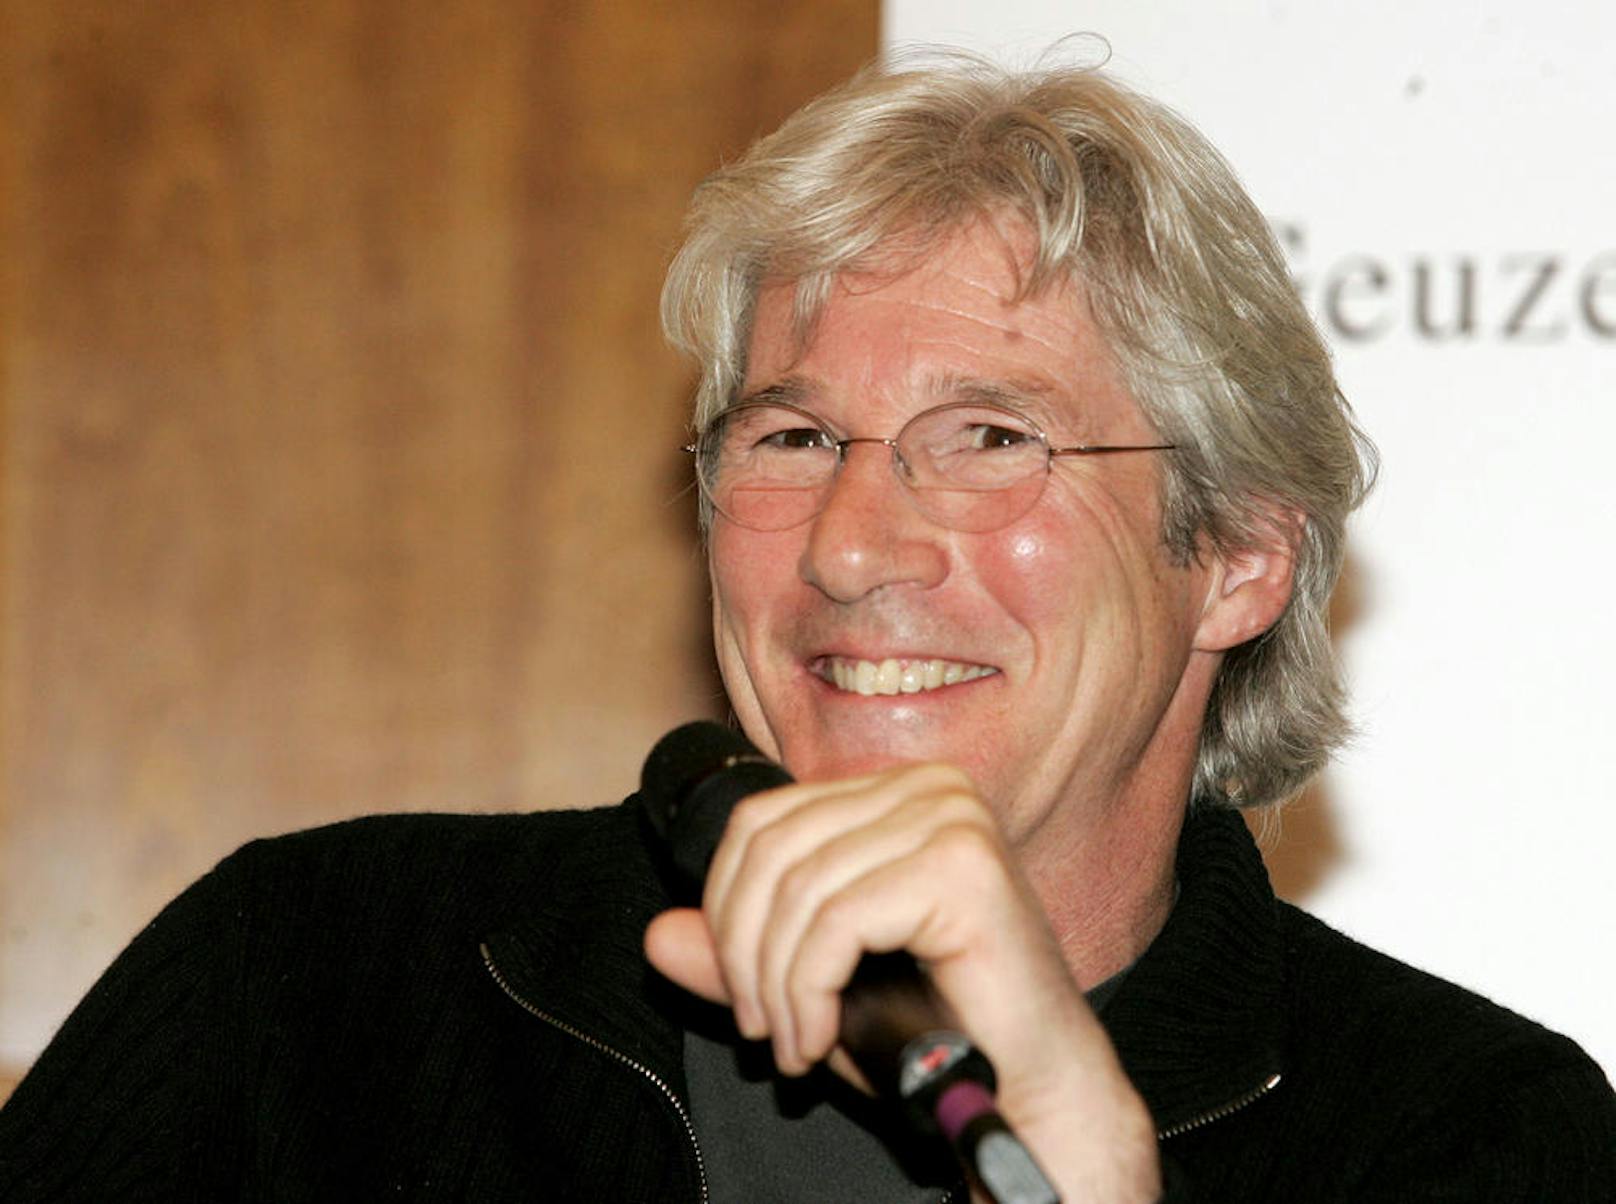 1993: Richard Gere (sexiest couple mit Cindy Crawford)